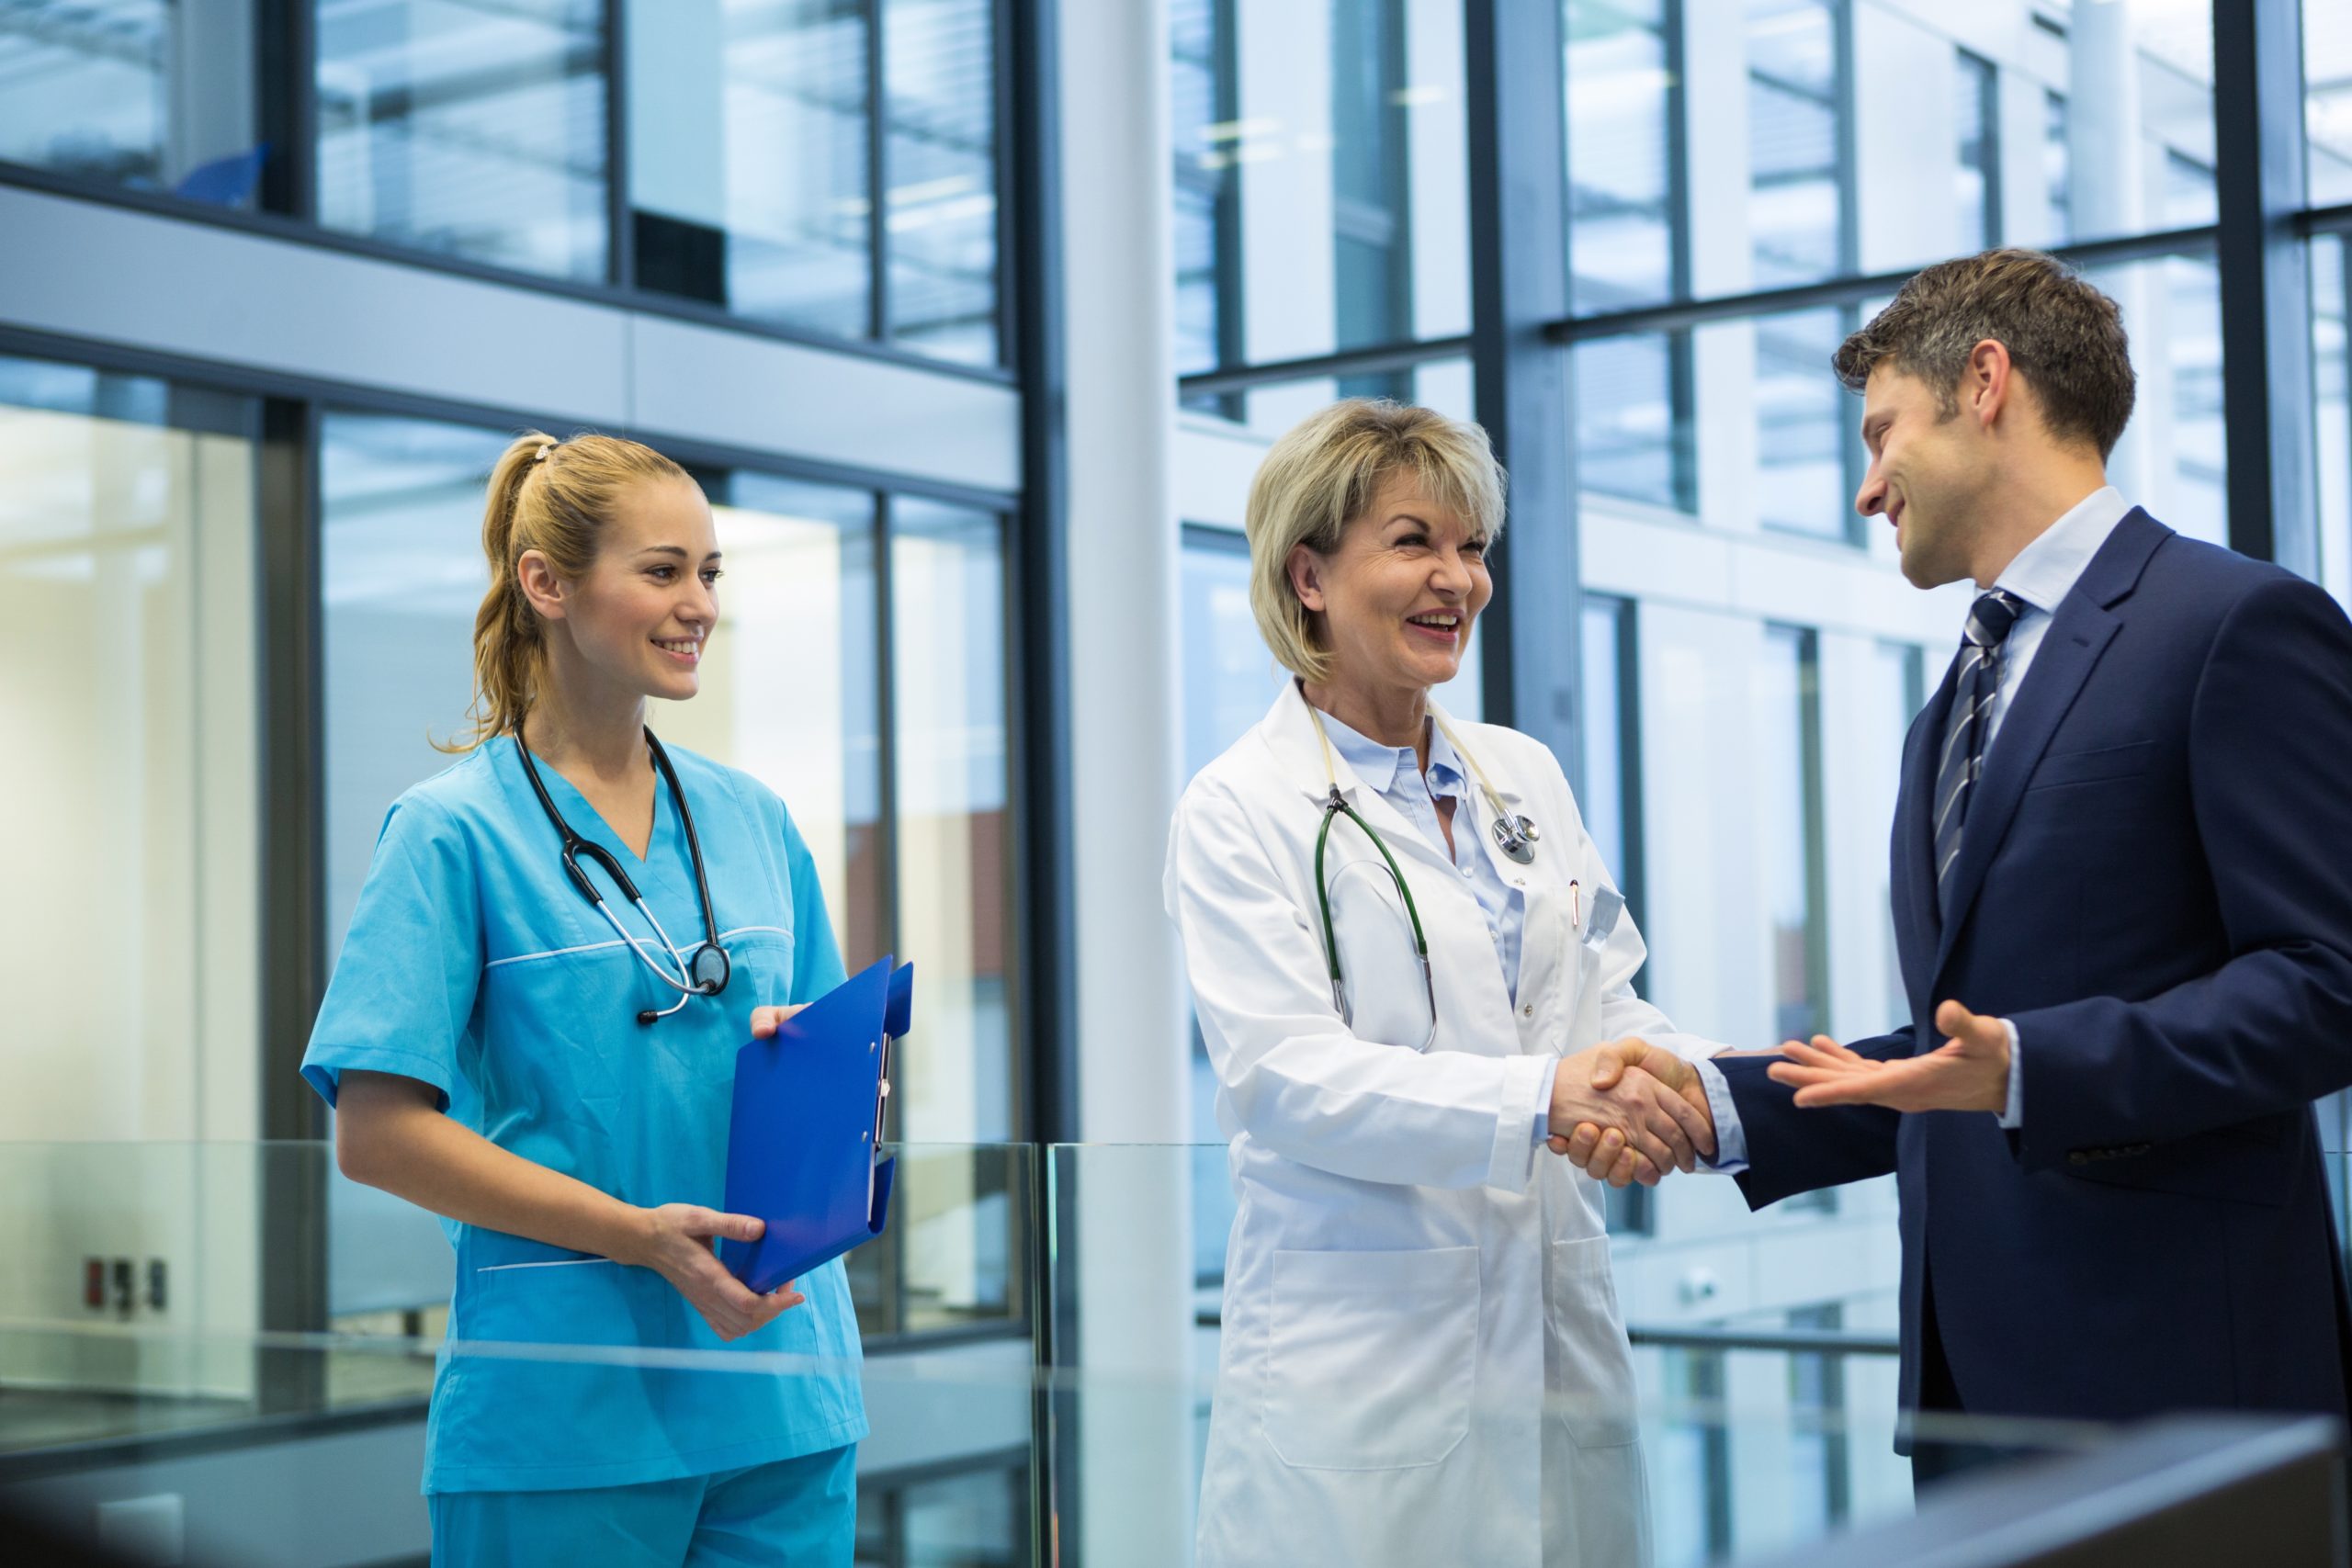 5 Tips for Welcoming Locum Tenens Providers Into Your Facility